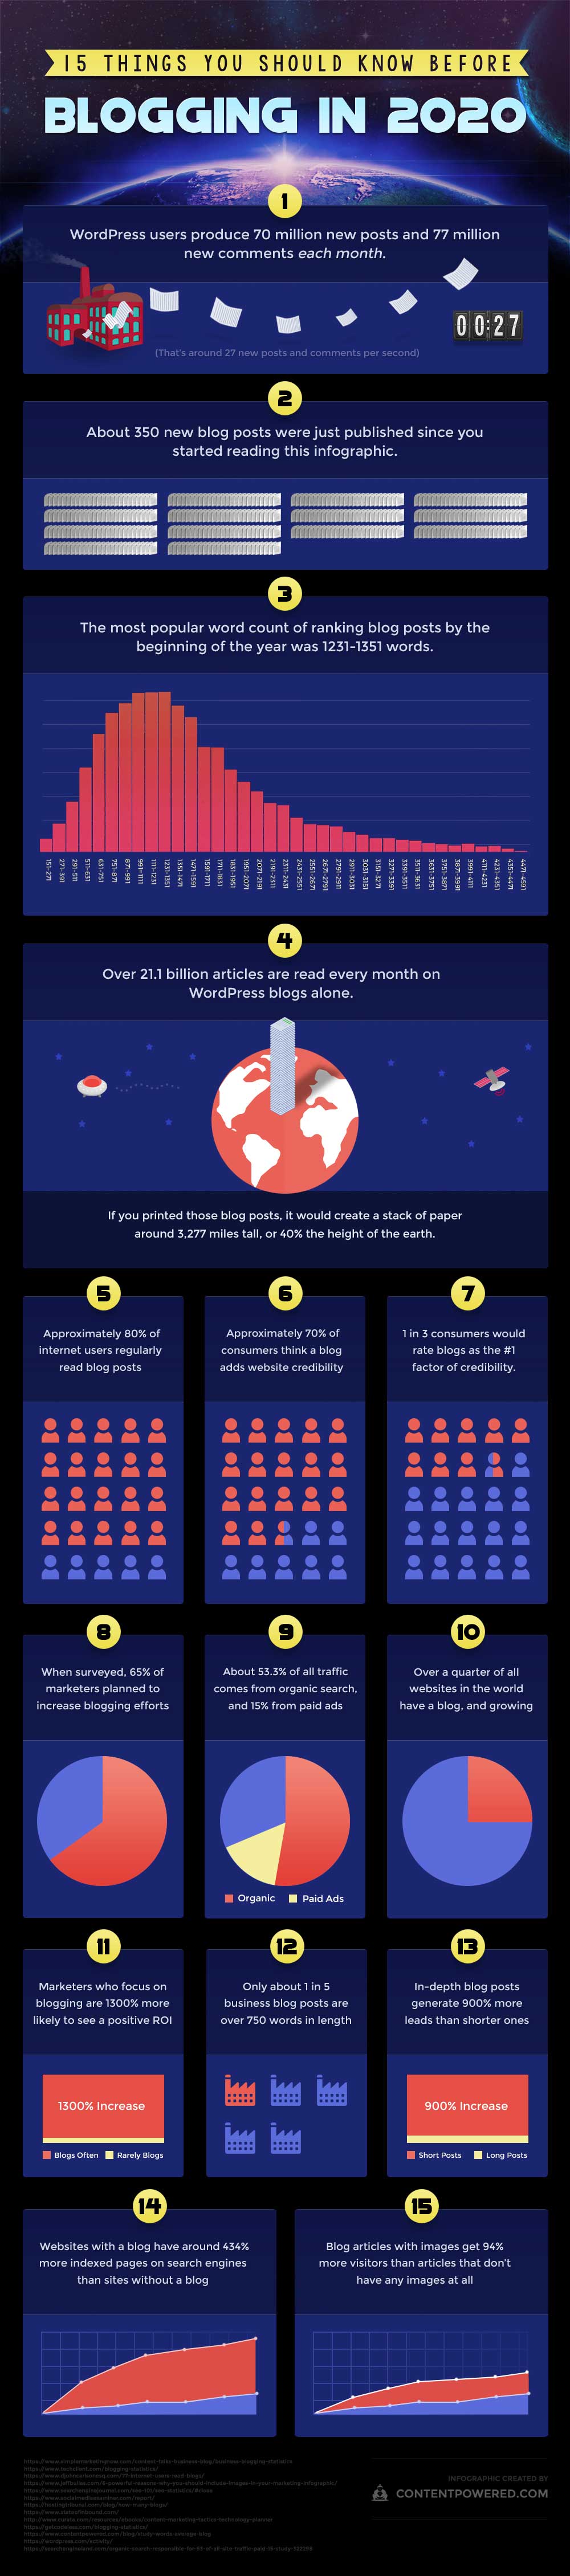 Infographic Blogging in 2020 